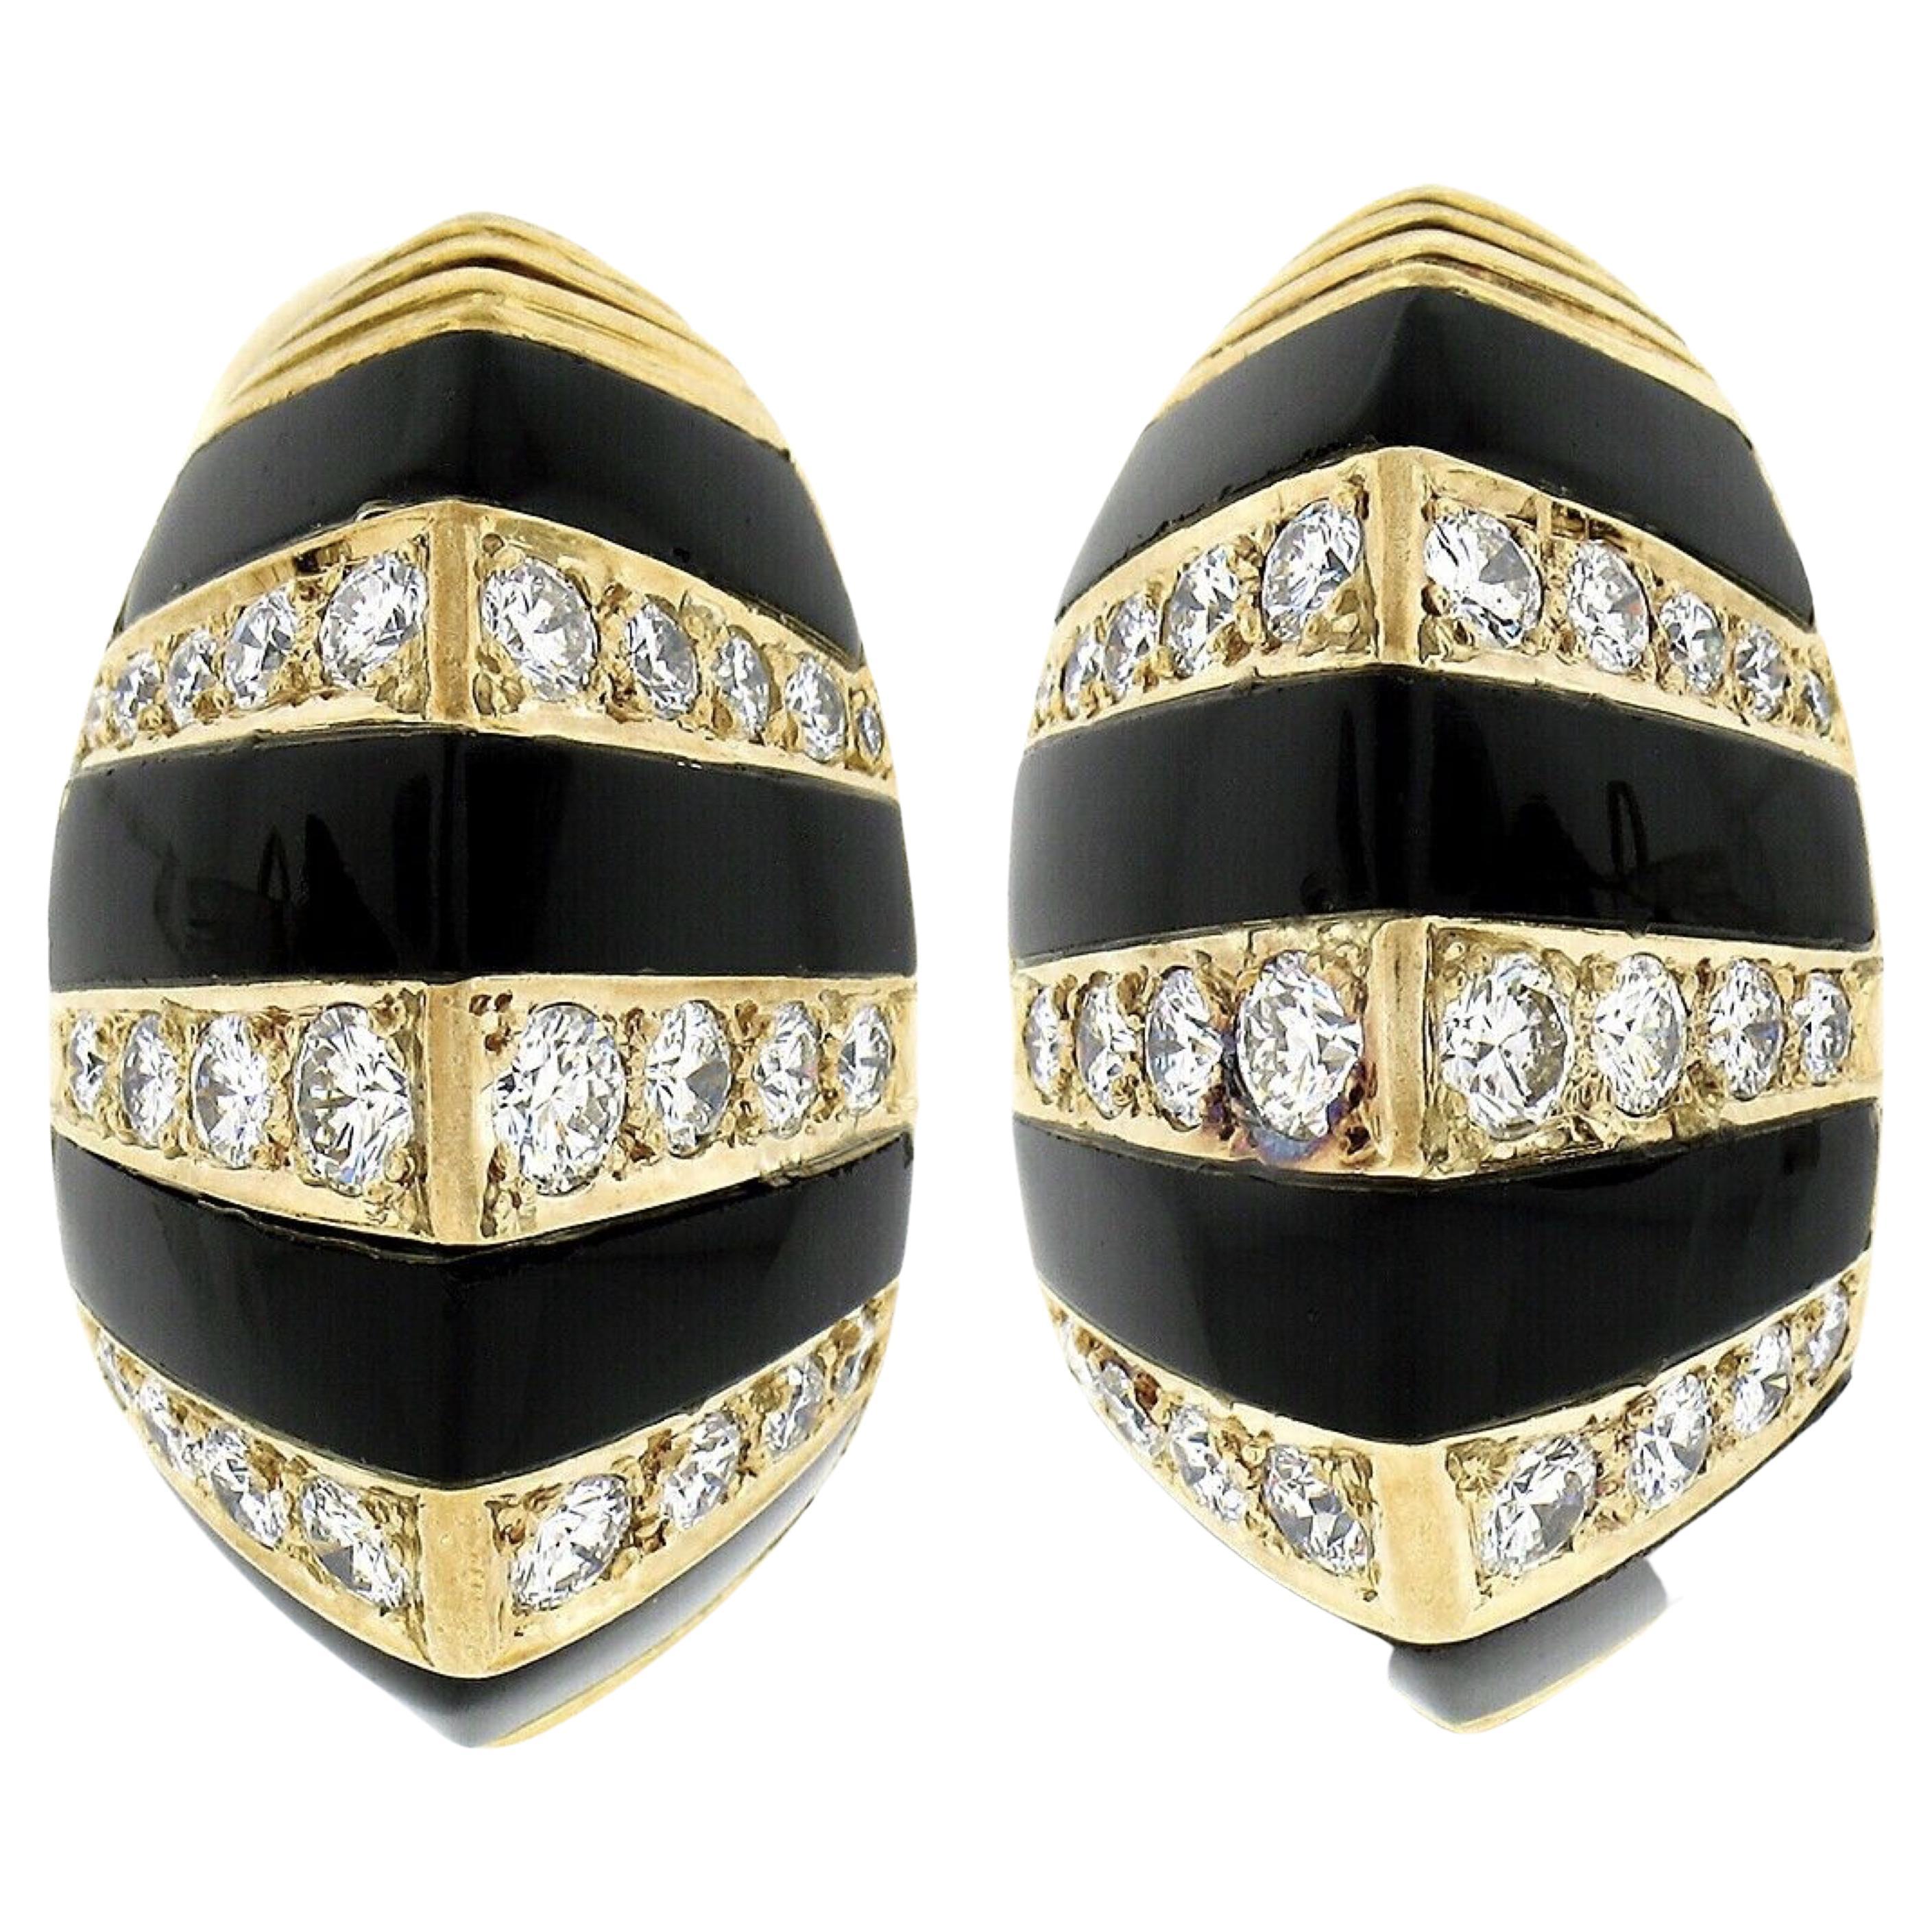 Vintage 18k Gold Inlaid Black Onyx & Pave Diamond Striped Domed Button Earrings